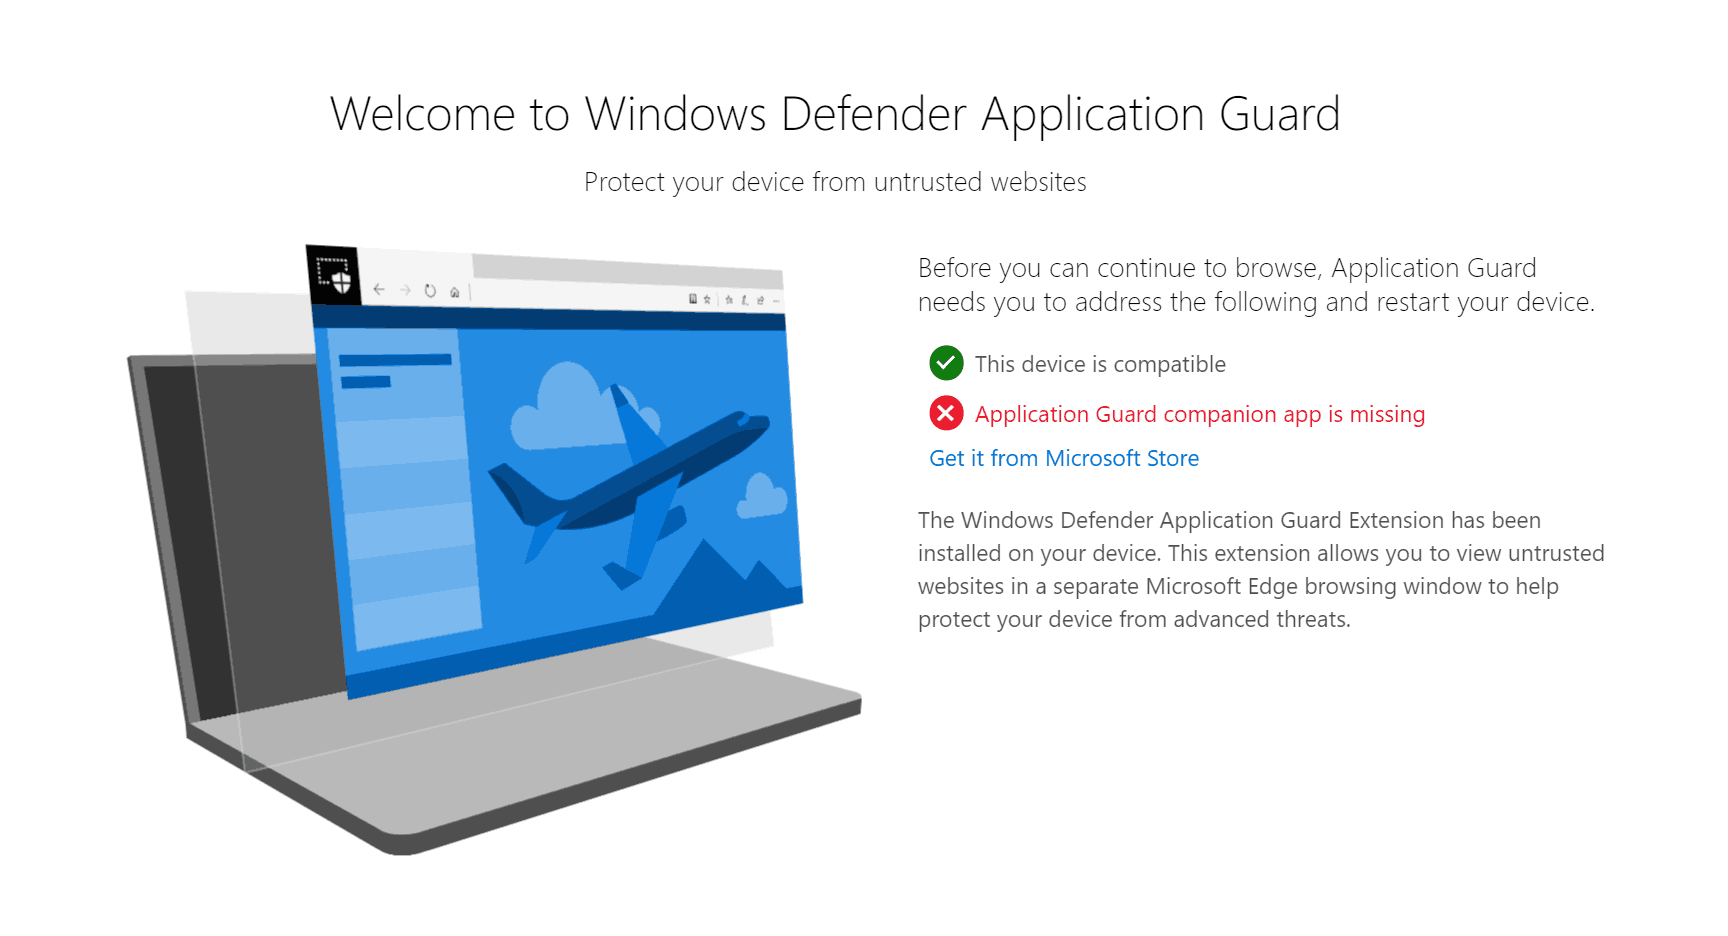 Windows Defender Application Guard Components Not Complete